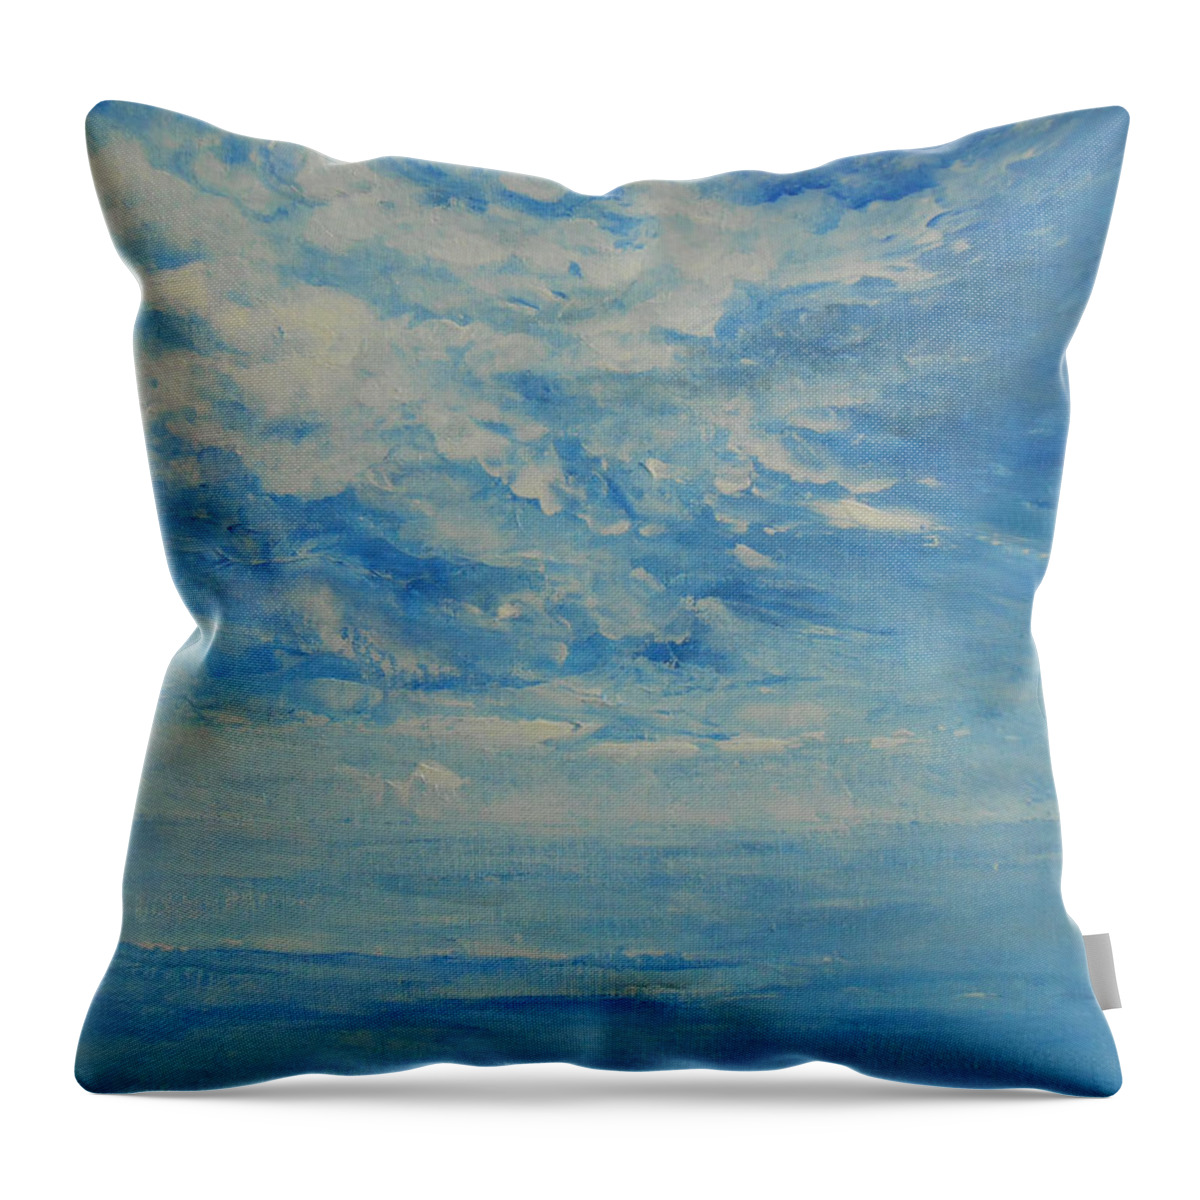 Skyscape Throw Pillow featuring the painting Behind All Clouds by Jane See